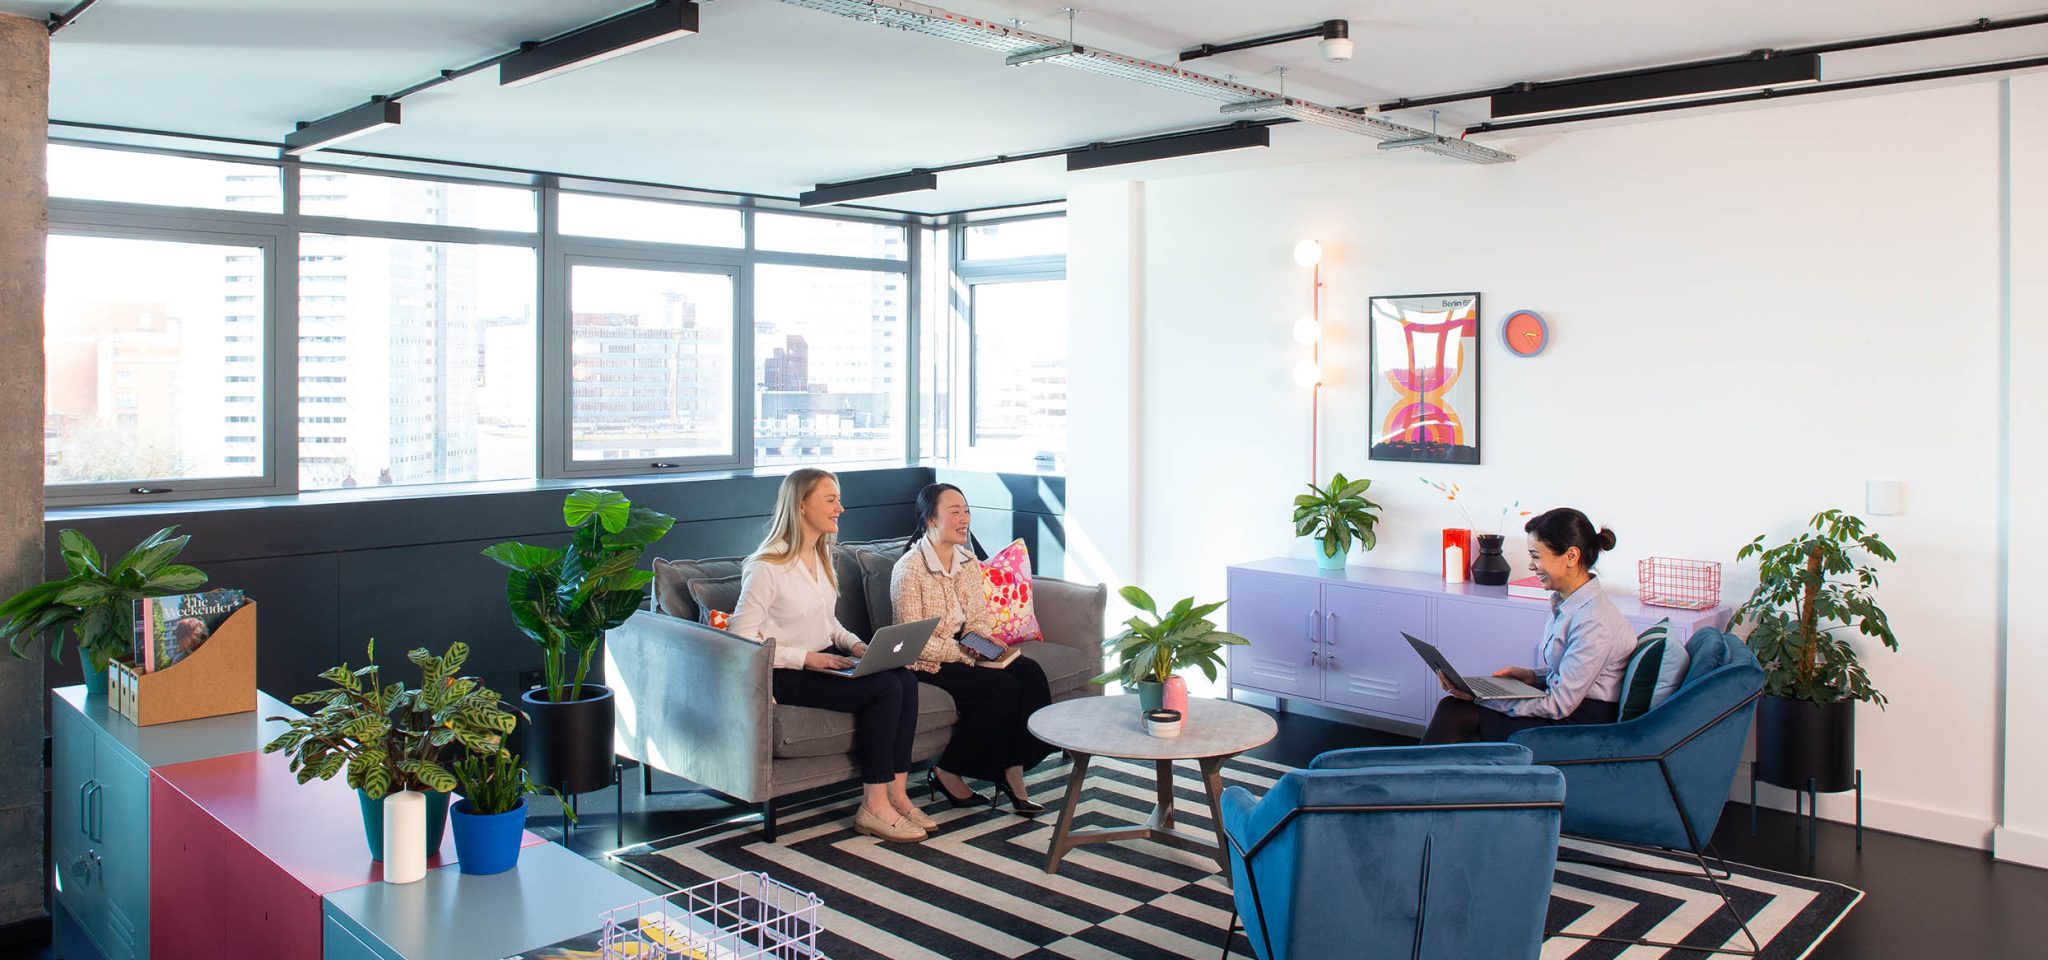 Breakout space at The Southside Building offices to let in Birmingham.